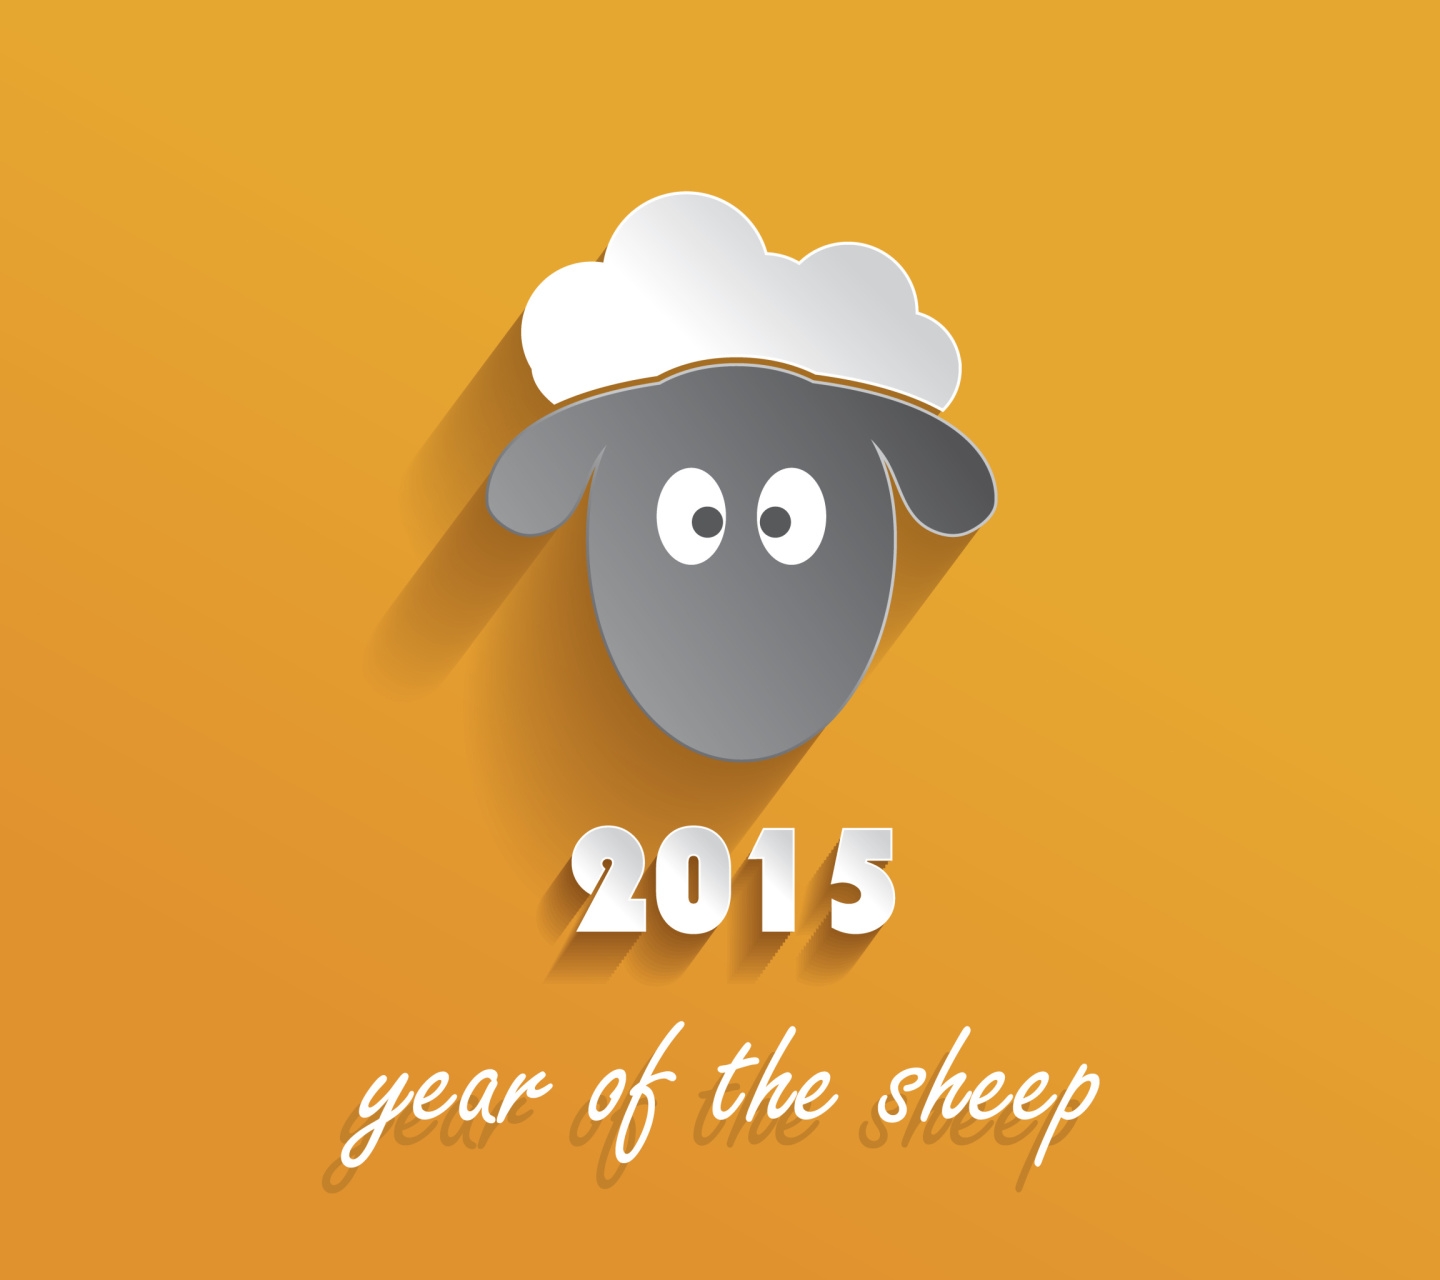 Year of the Sheep 2015 wallpaper 1440x1280